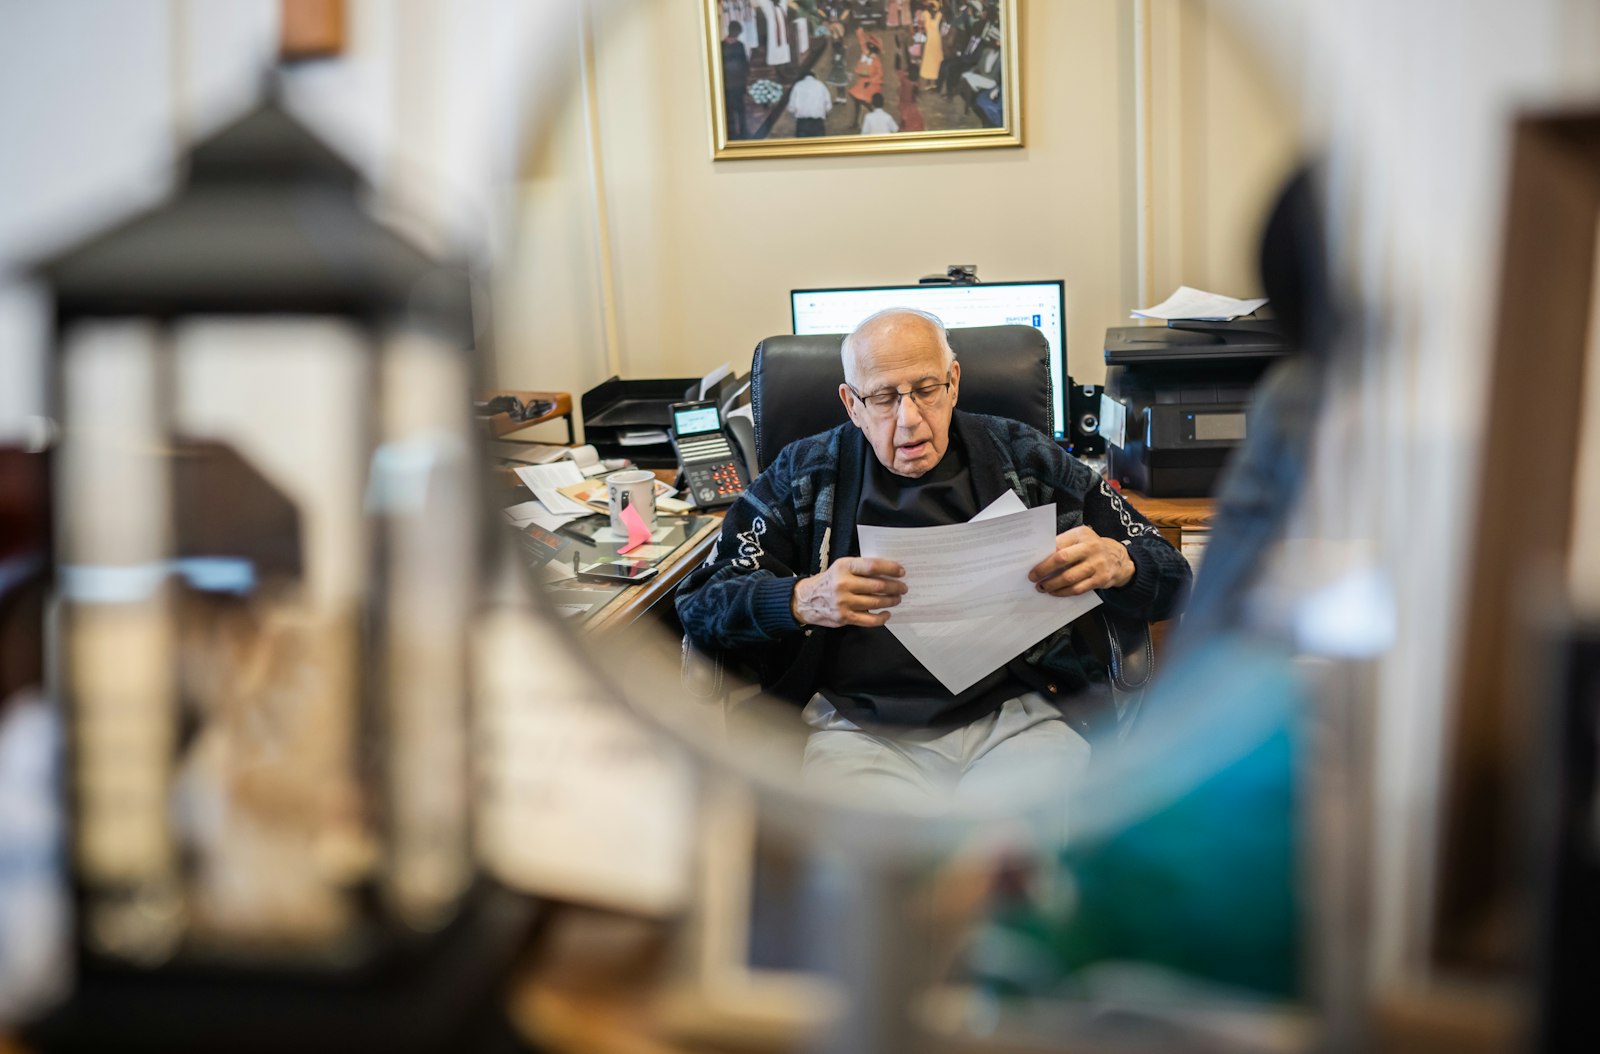 Fr. Thomas goes over paperwork in his office at Sacred Heart Parish in Detroit, where he began serving as pastor in 1968. At 92, he relies more these days on his parish staff, but says he's never considered retiring.